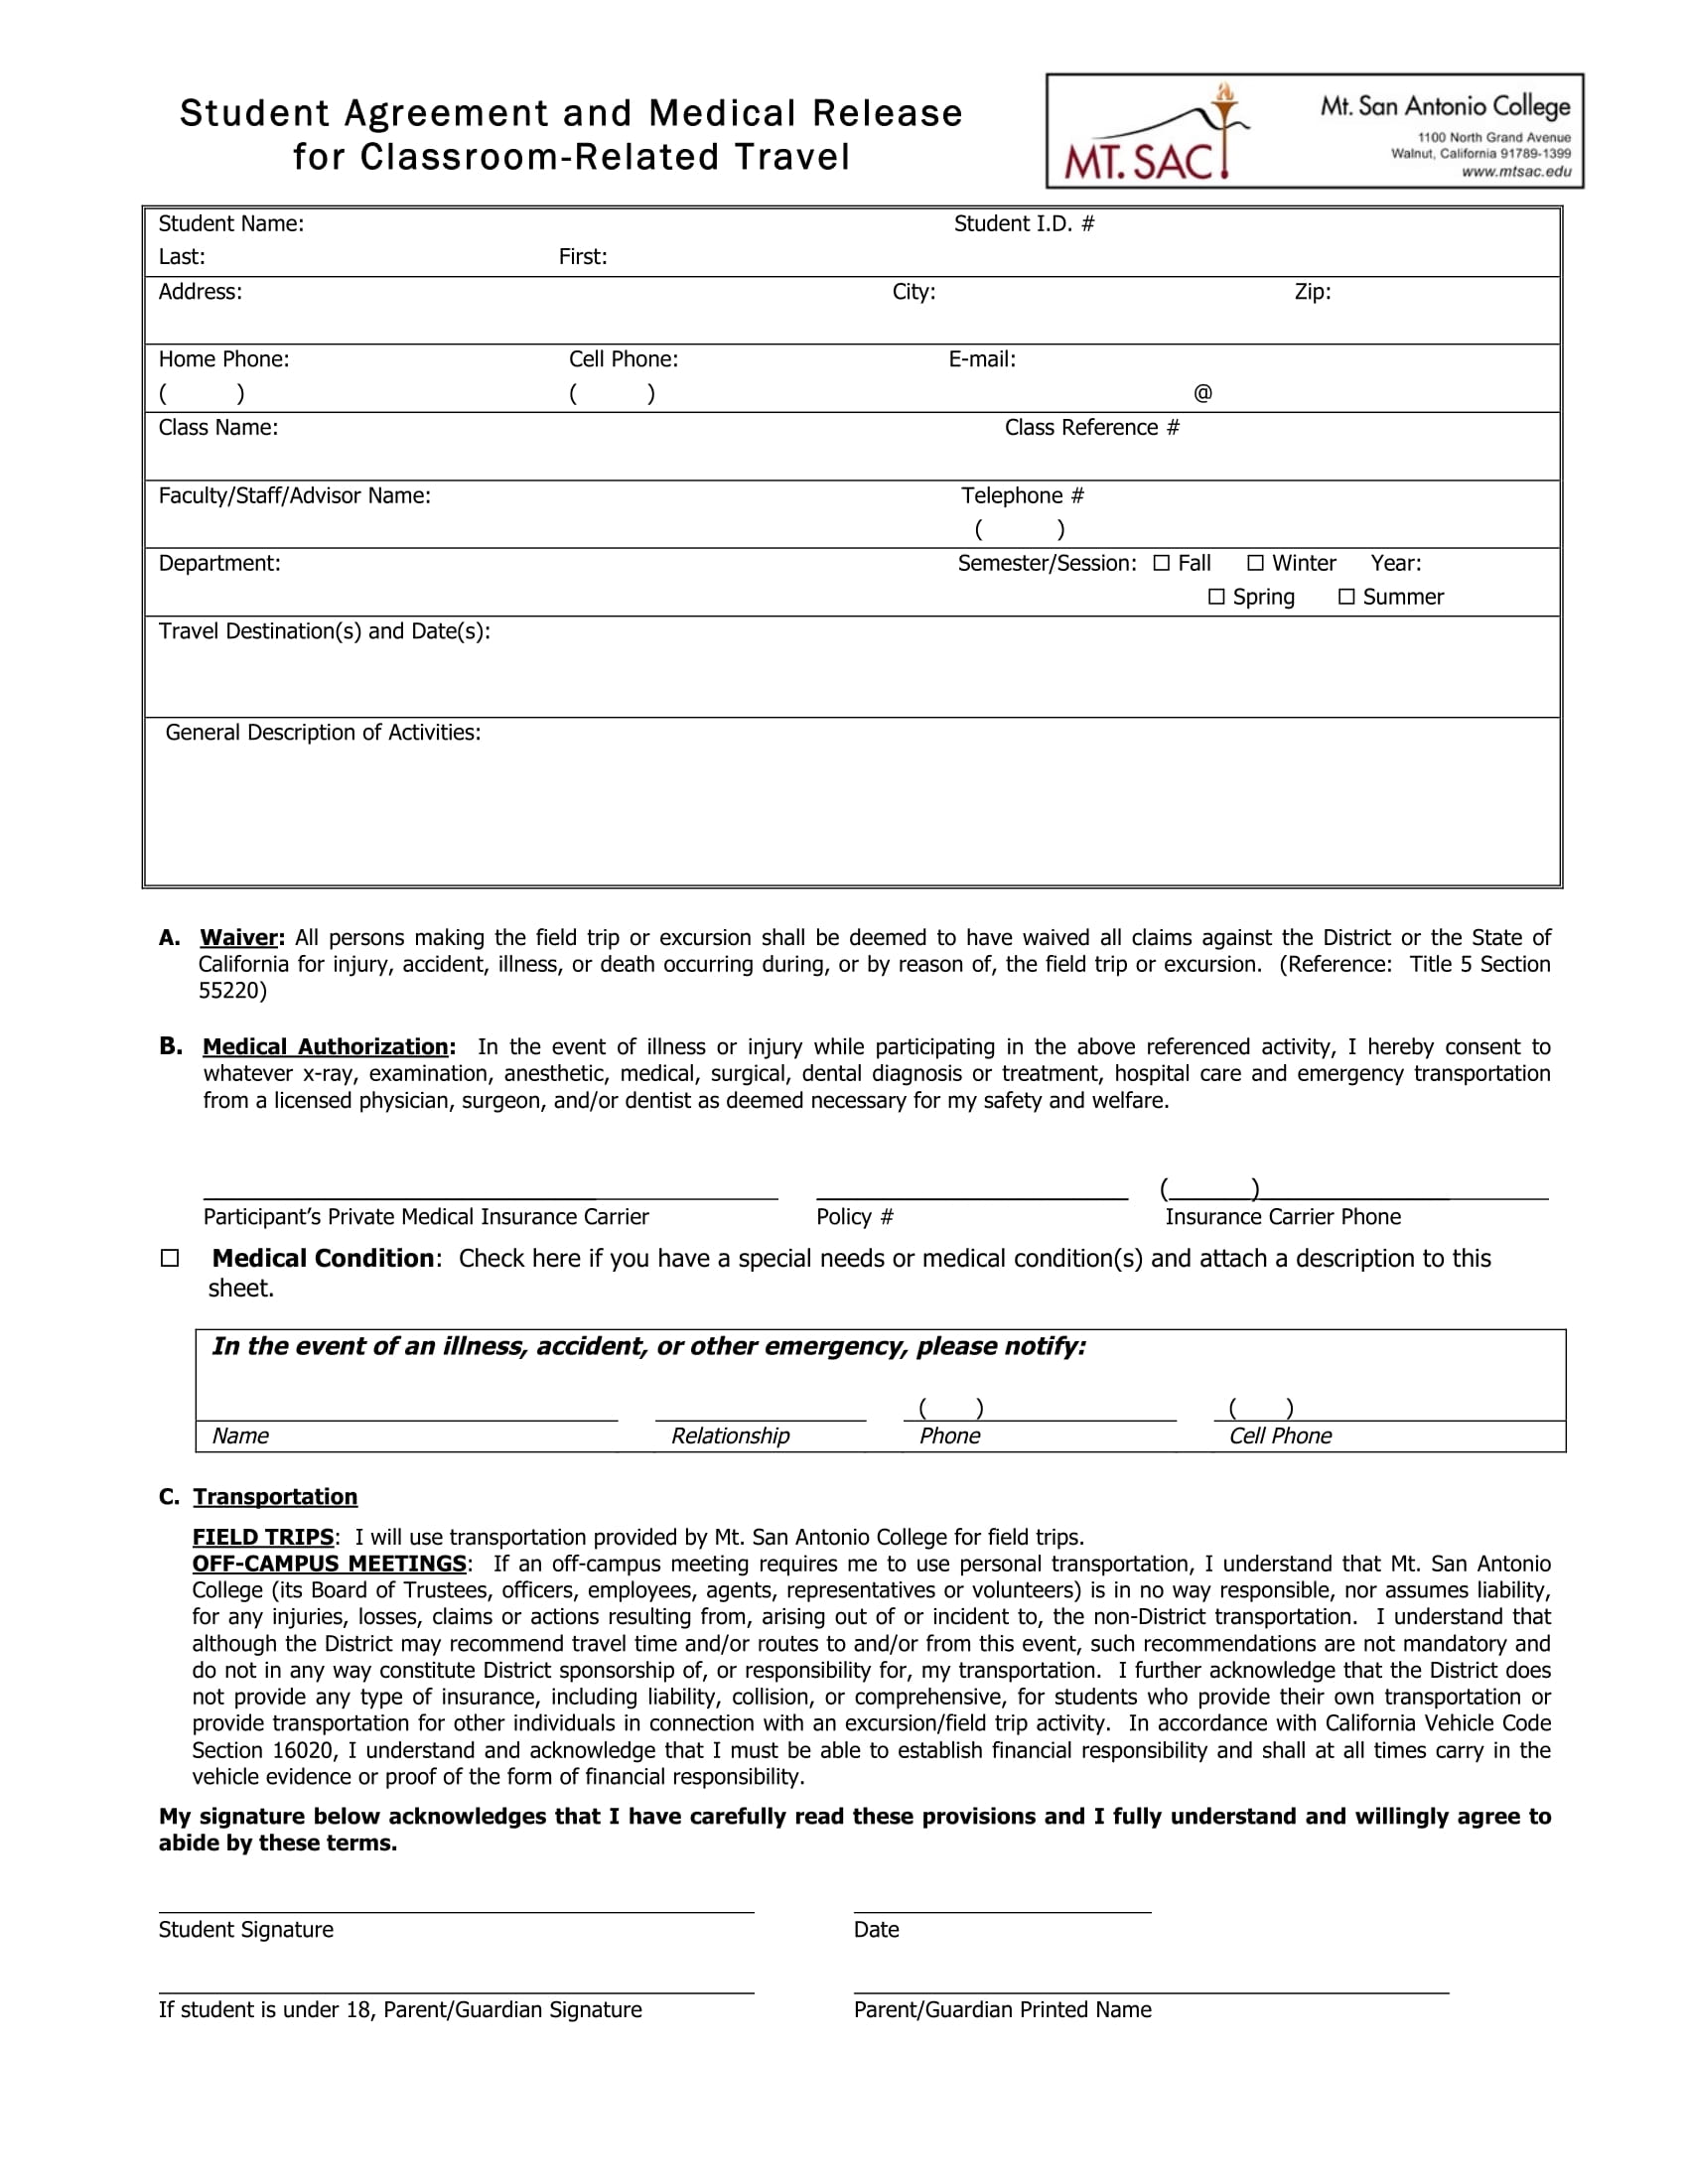 medical release student agreement contract form 1